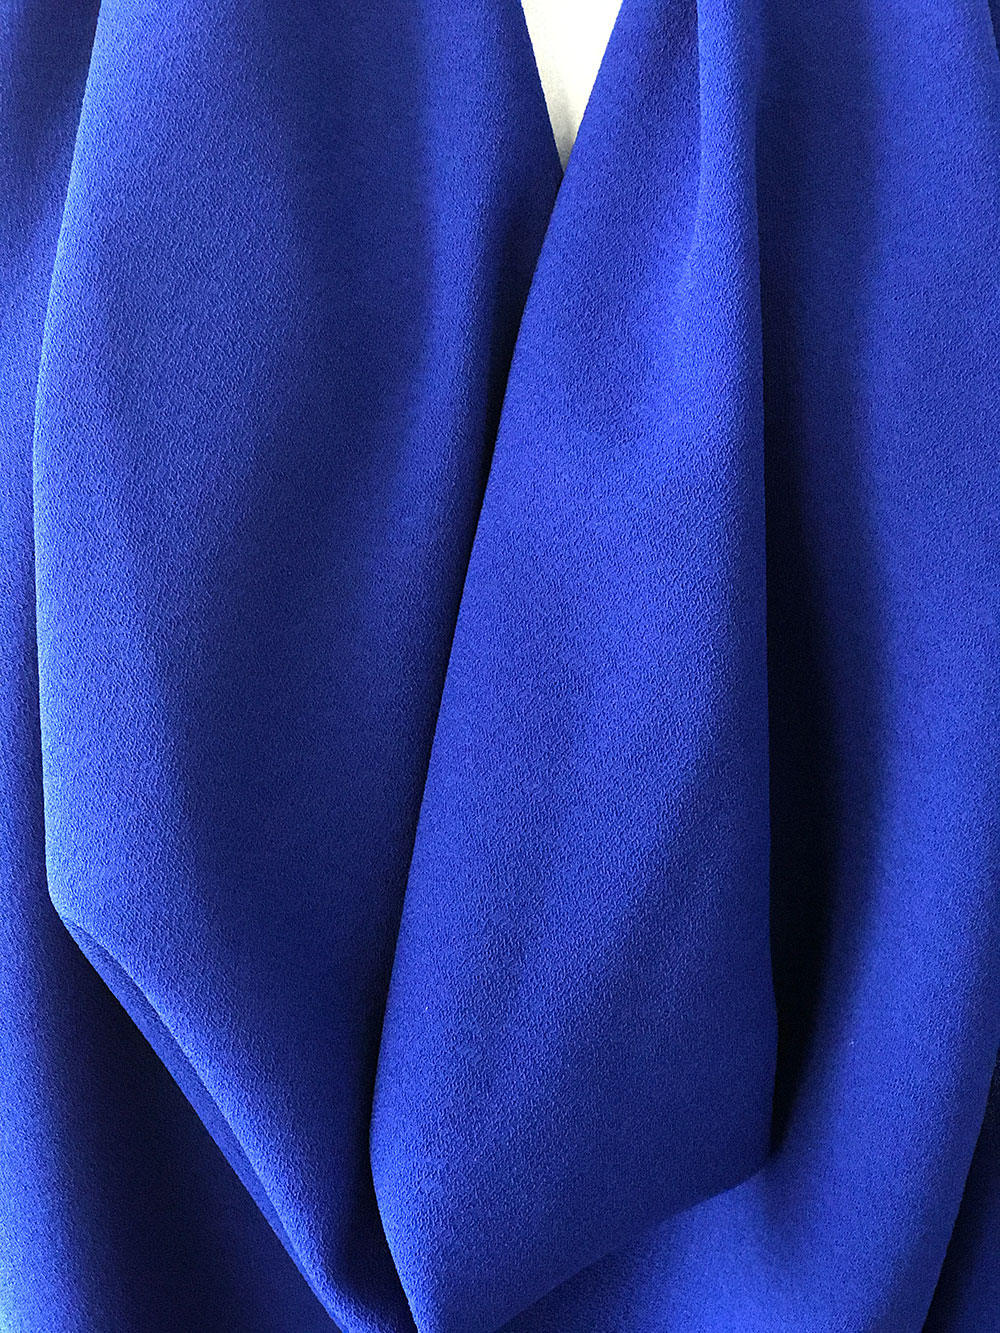 Cobalt blue stretch crepe fabric 2 way stretch pebble crepe textured polyester spandex 150cm 60 inches